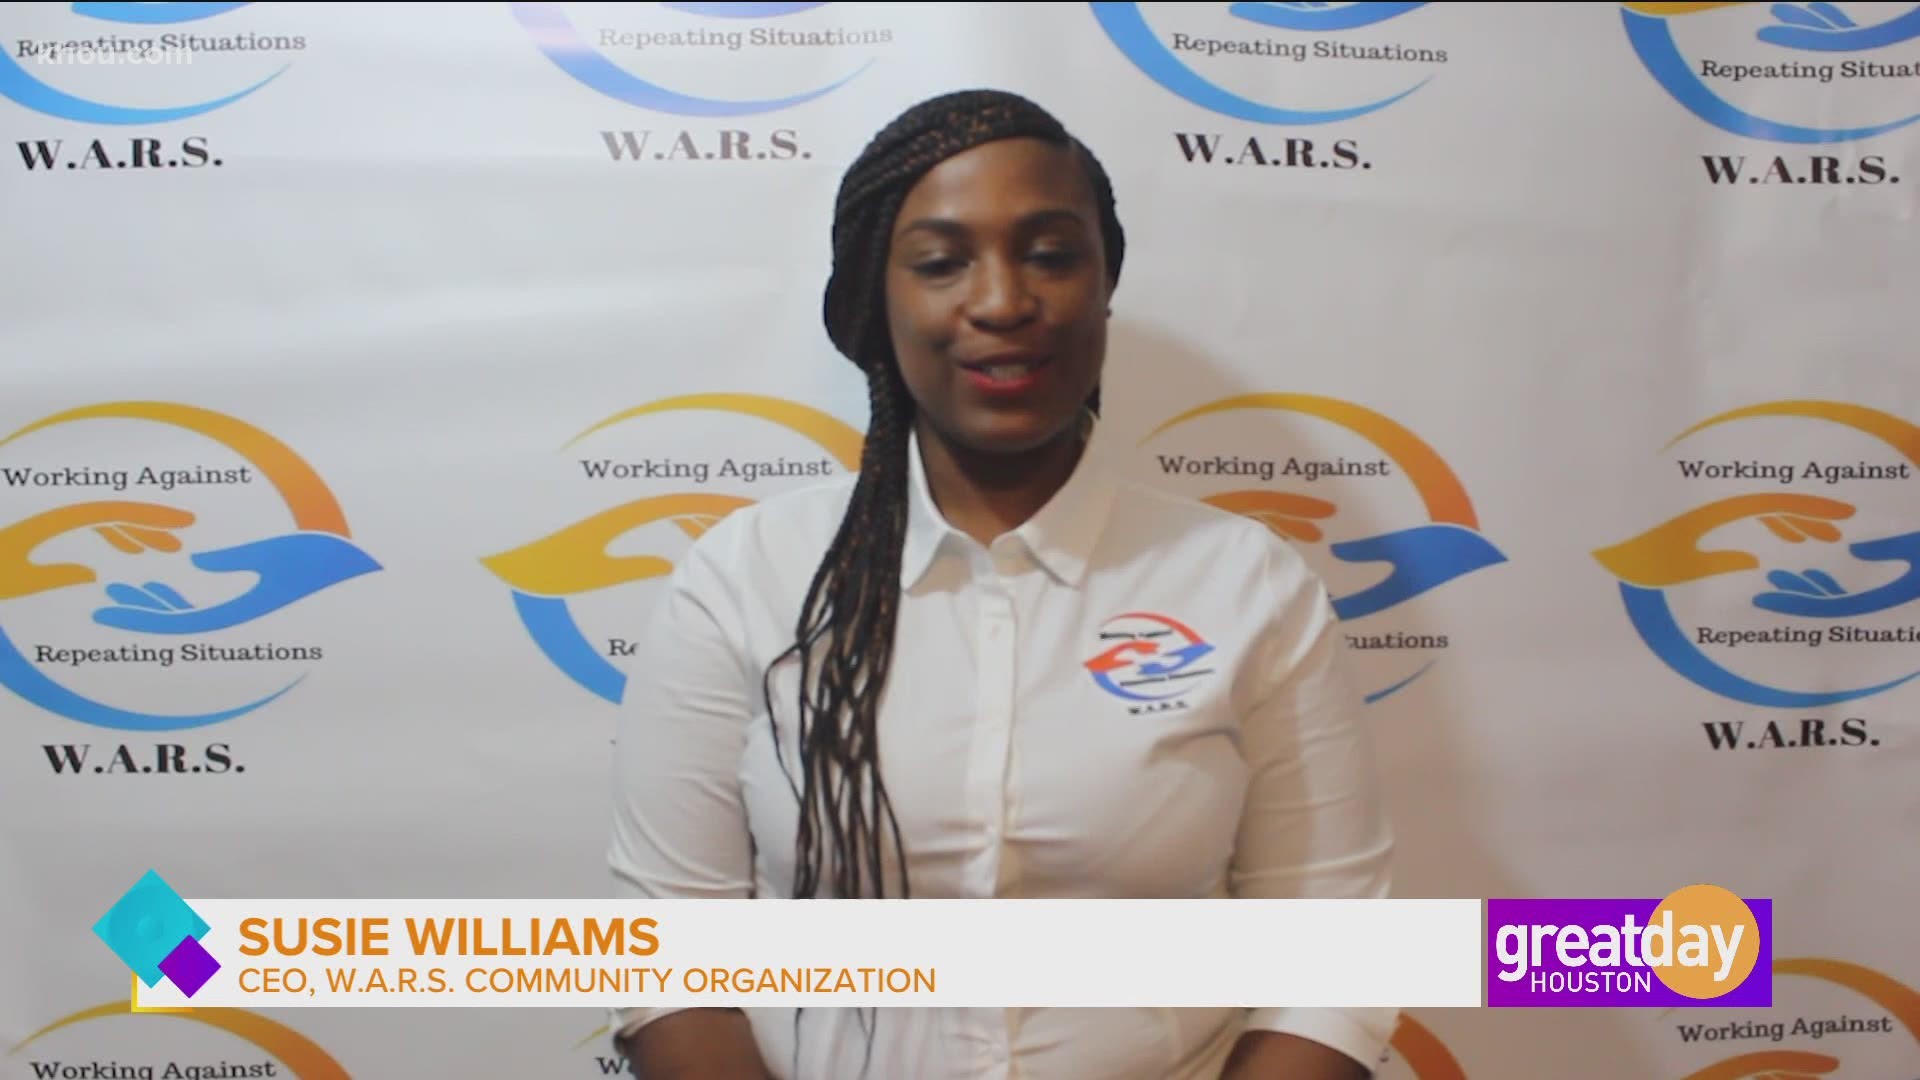 Susie Williams, CEO of W.A.R.S. Community Organization, is creating an environment that's inclusive.